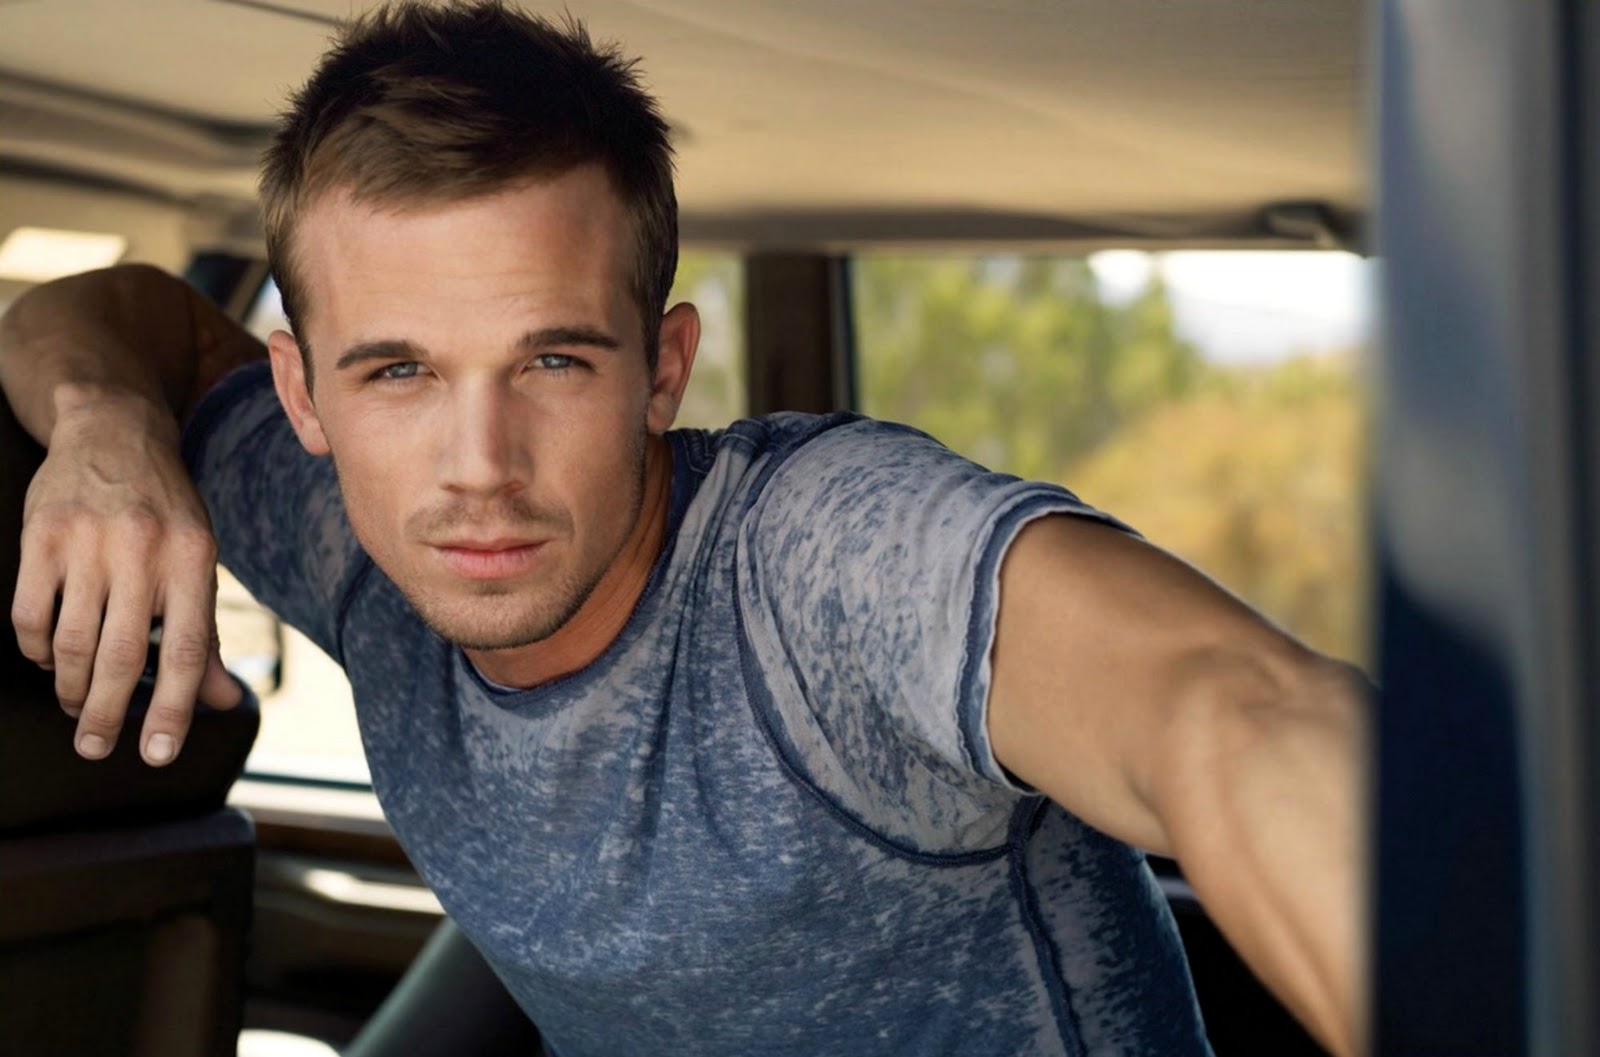 Rants of a Diva: 100 Hot and a Dame: #88 Cam Gigandet